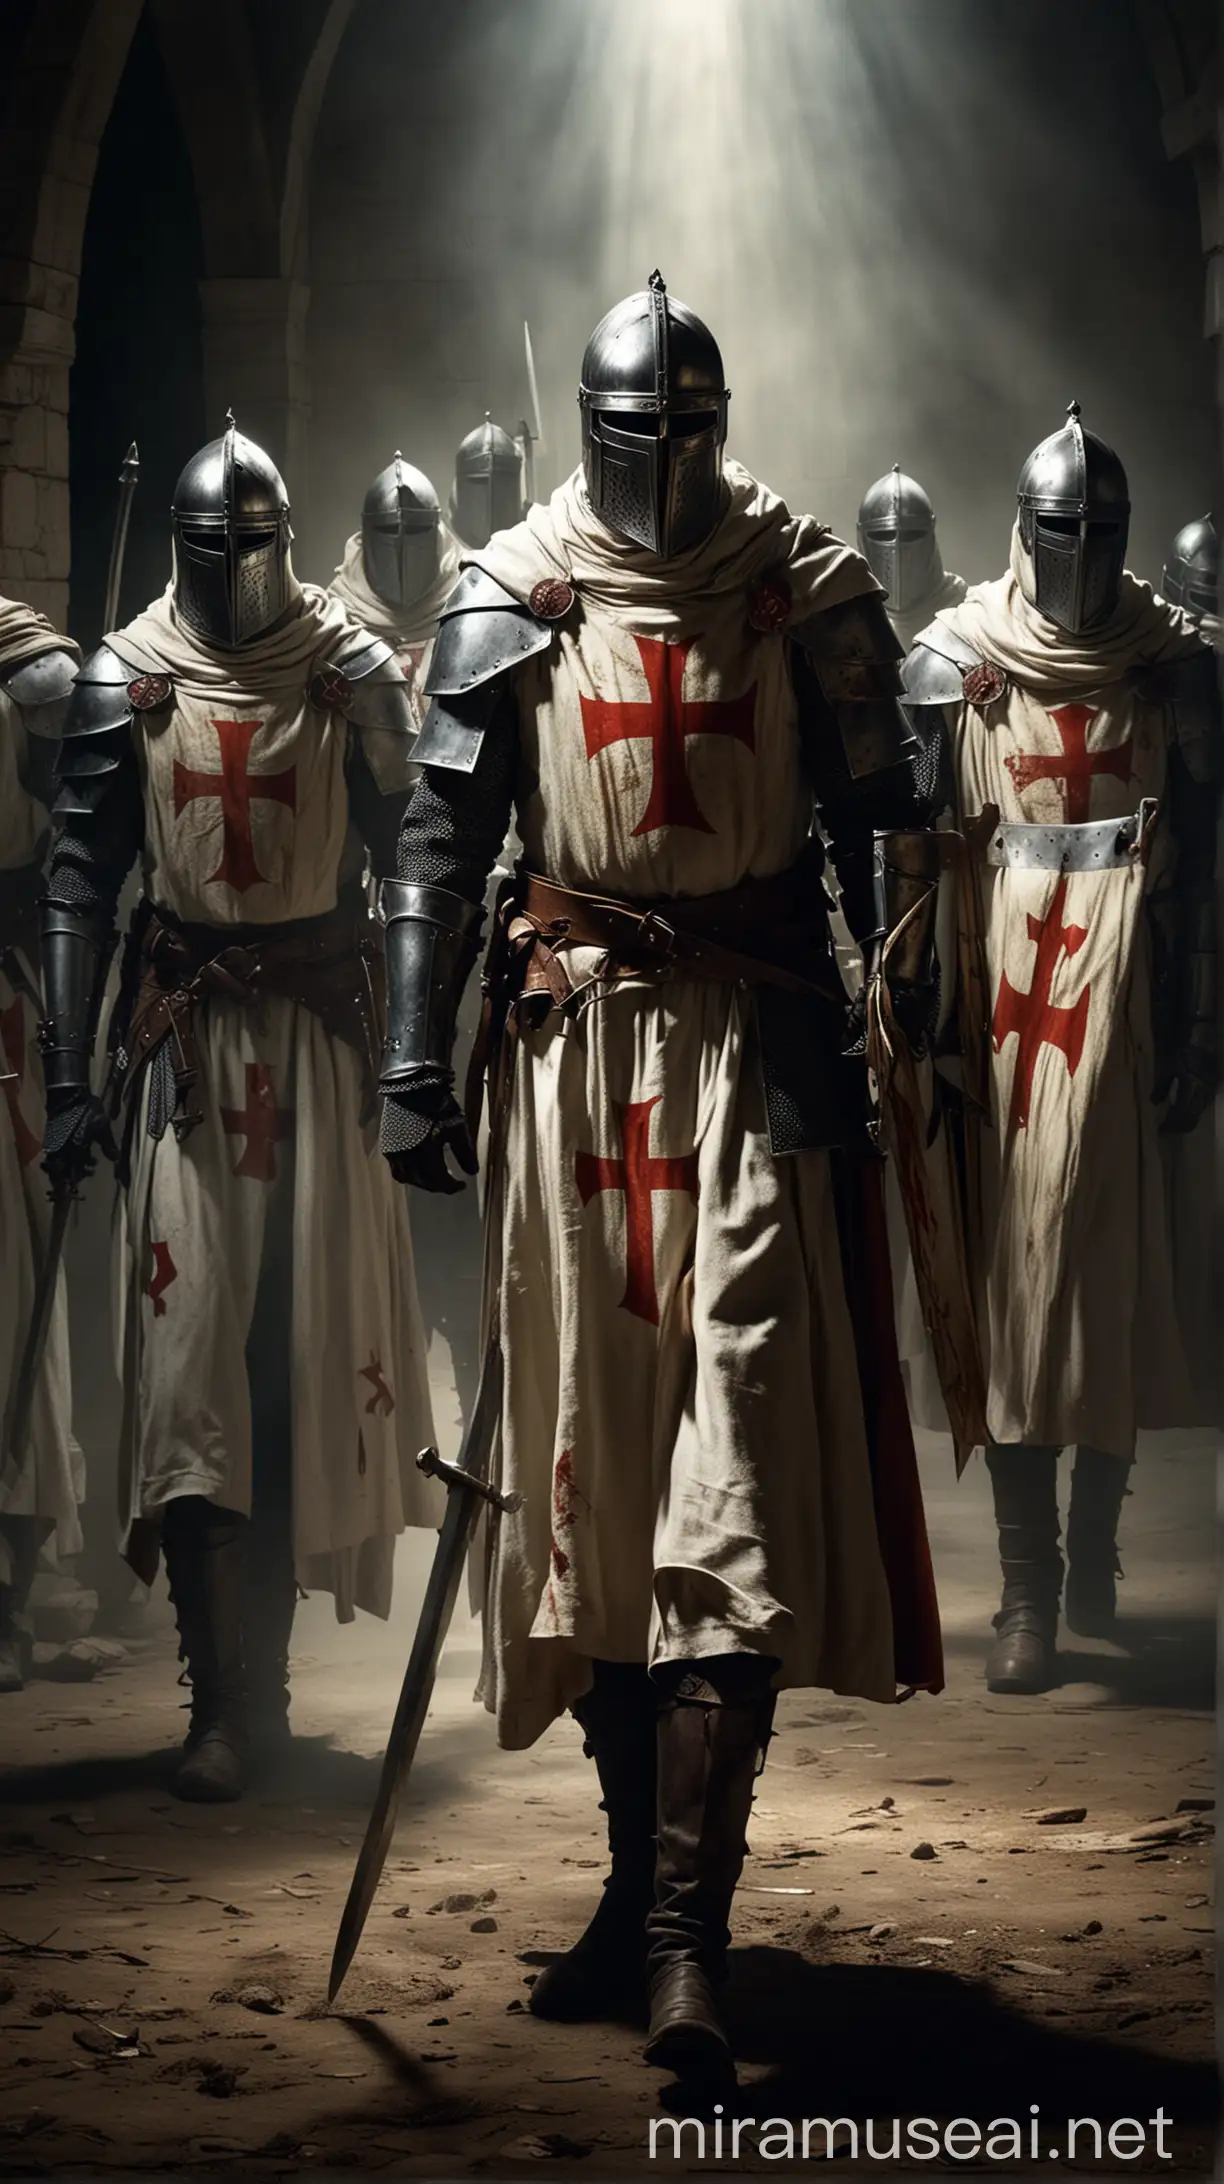  Use an image of a group of Knights Templar in dramatic lighting, emphasizing mystery and strength. hyper realistic